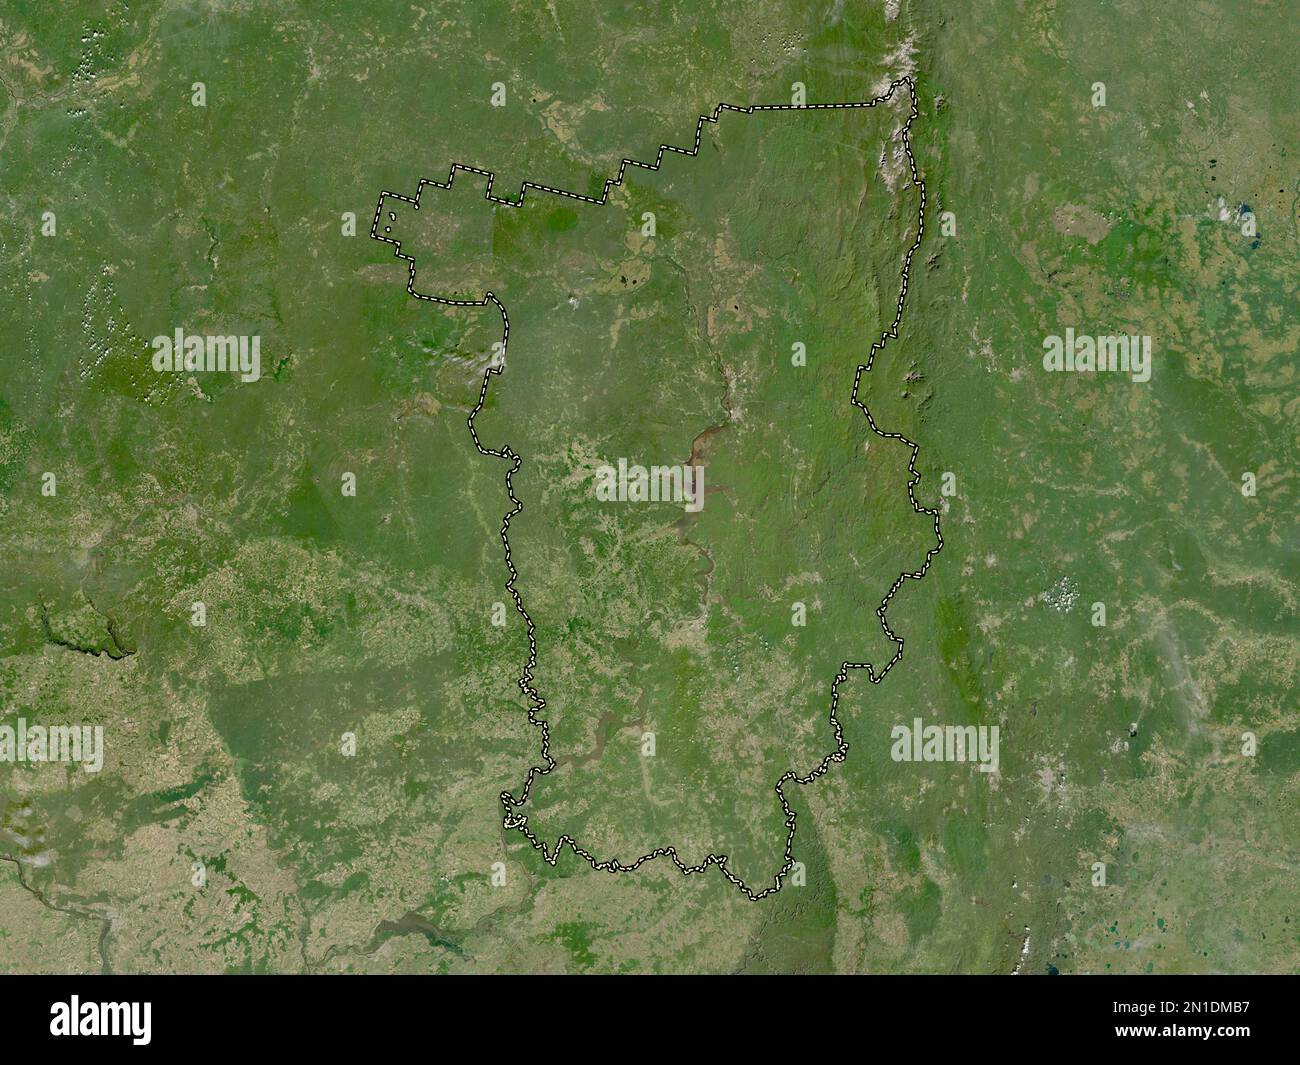 Perm', territory of Russia. Low resolution satellite map Stock Photo